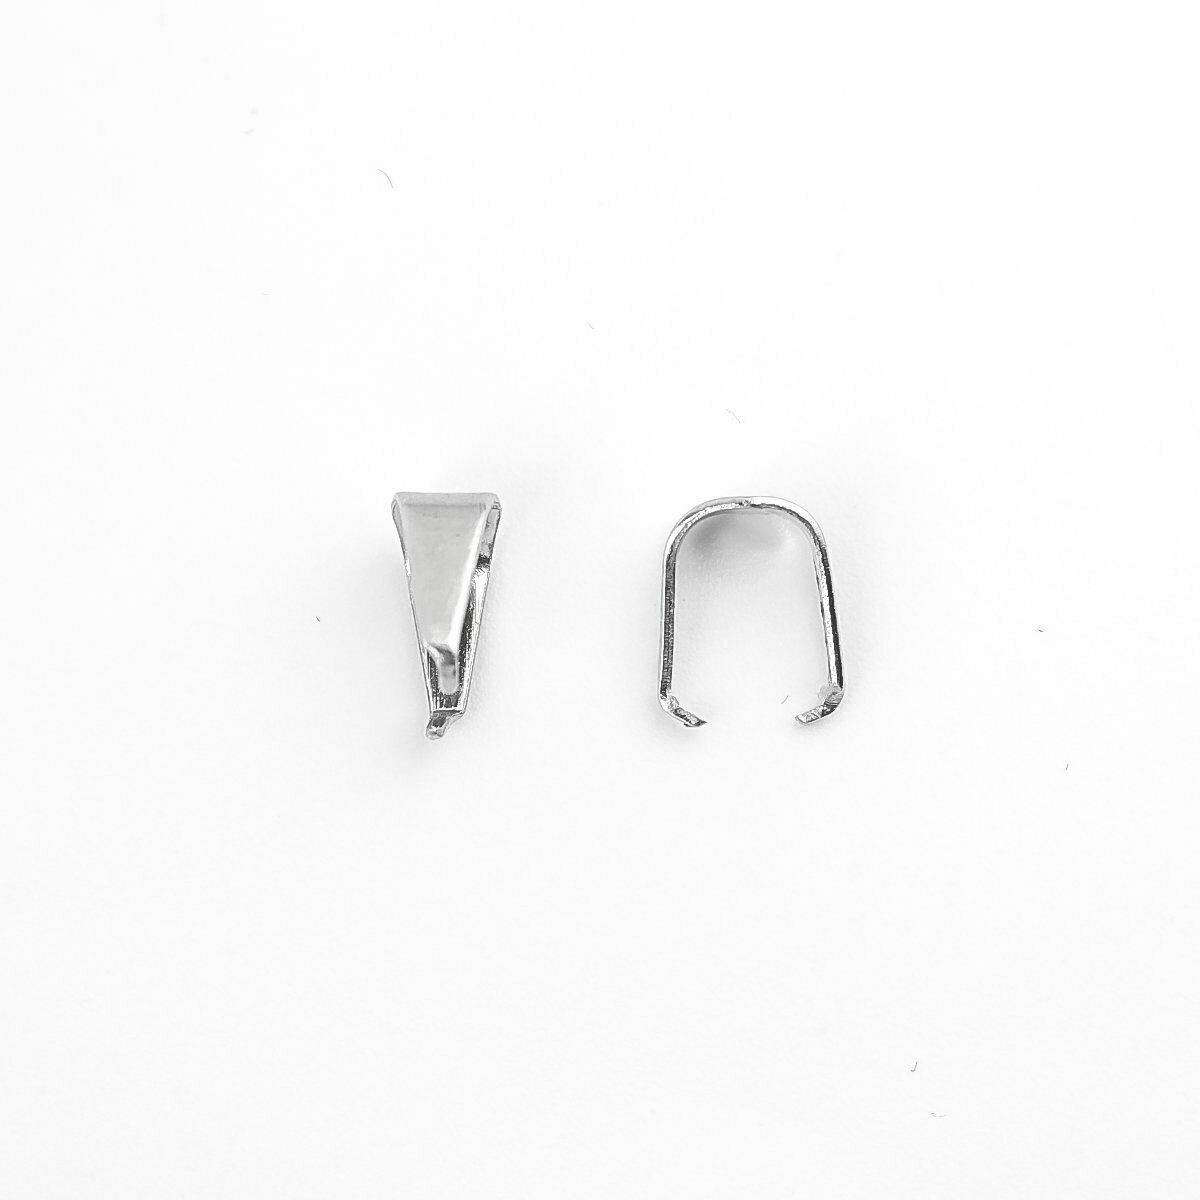 10 Stainless Steel Pendant Pinch Bails Clasps U-shaped Silver Tone 7x5mm